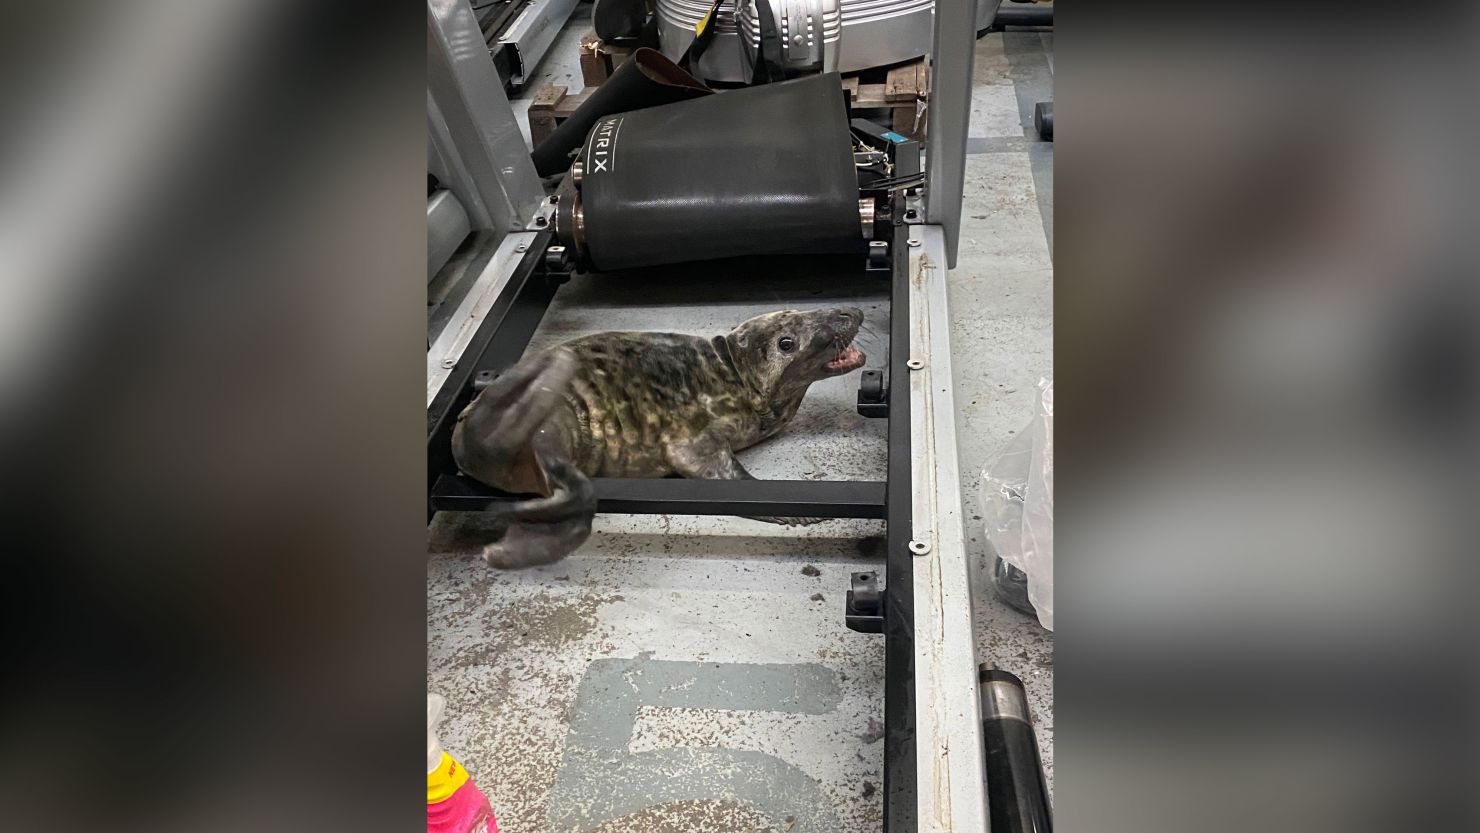 Workers at a gym equipment  warehouse were stunned to find a gray seal pup among the treadmills.